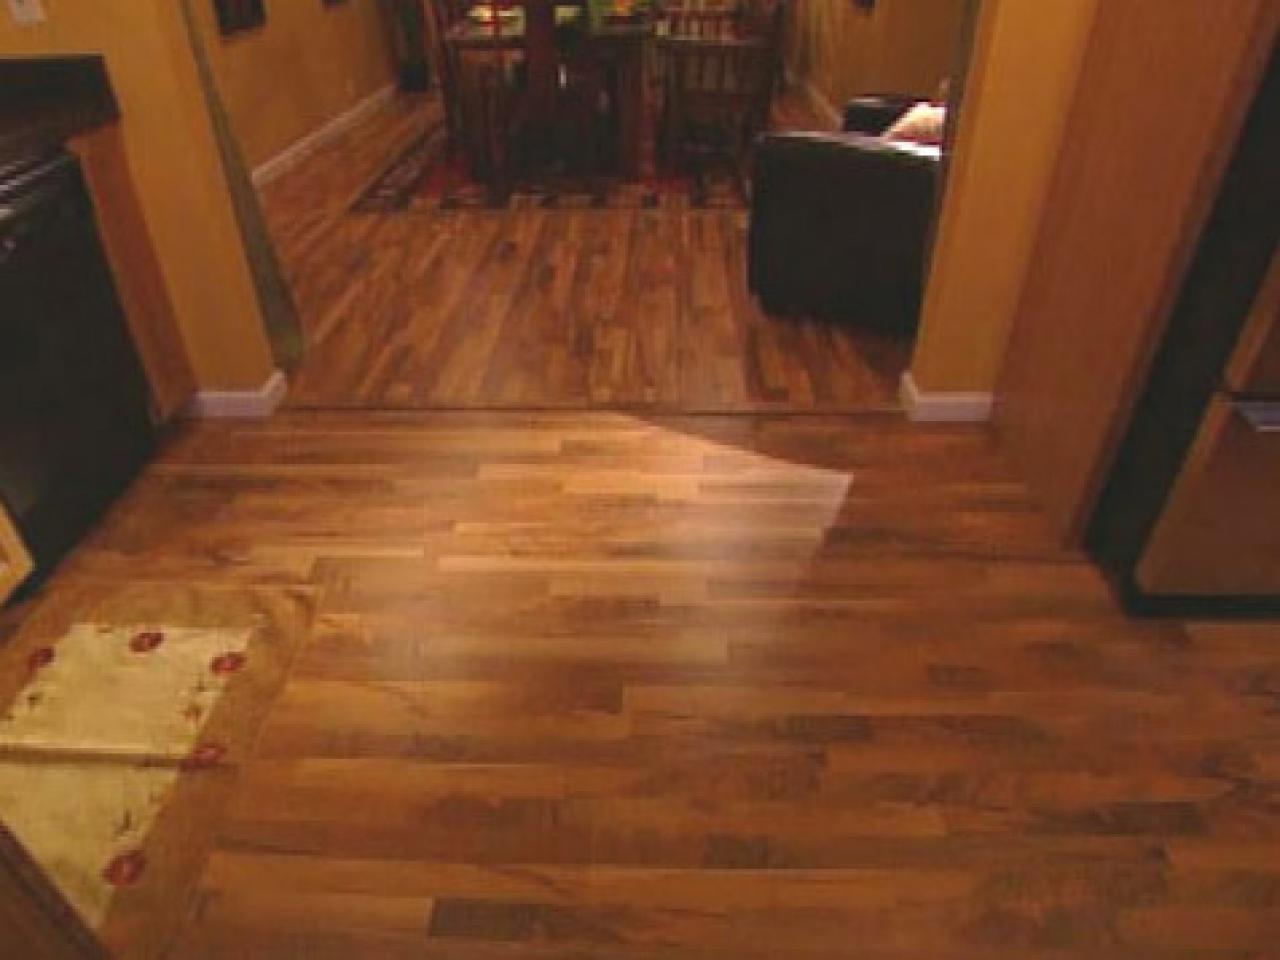 Install Tongue And Groove Wood Veneer, How To Install Hardwood Flooring Patterns